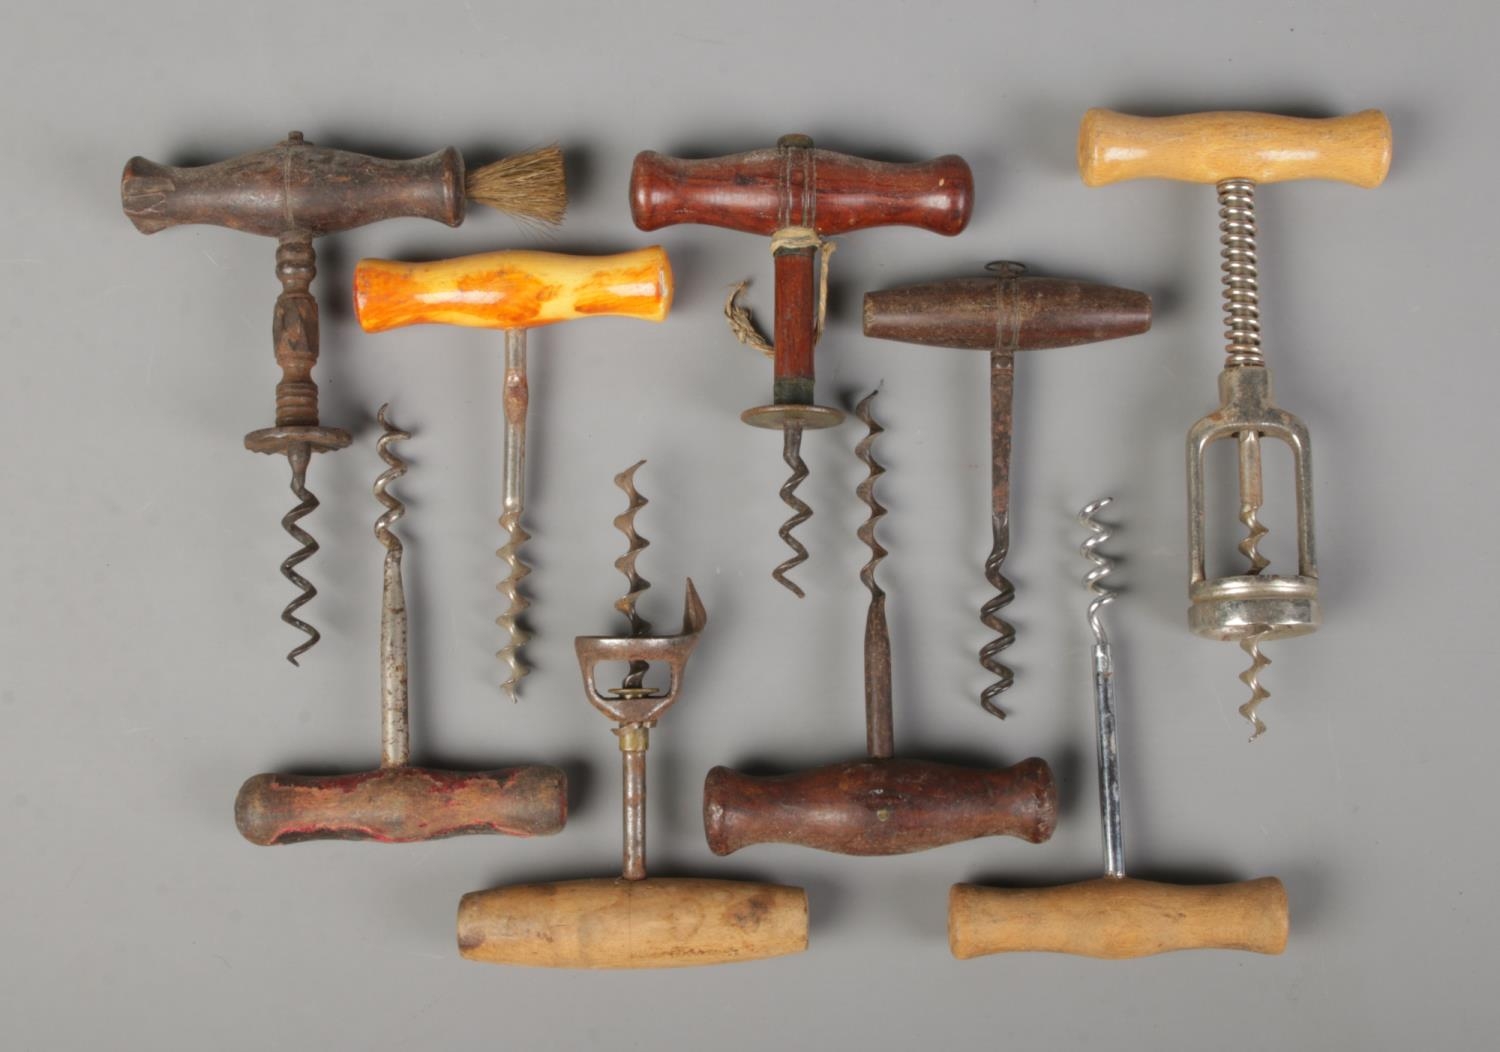 A collection of vintage and antique corkscrews. All having turned wooden handles.